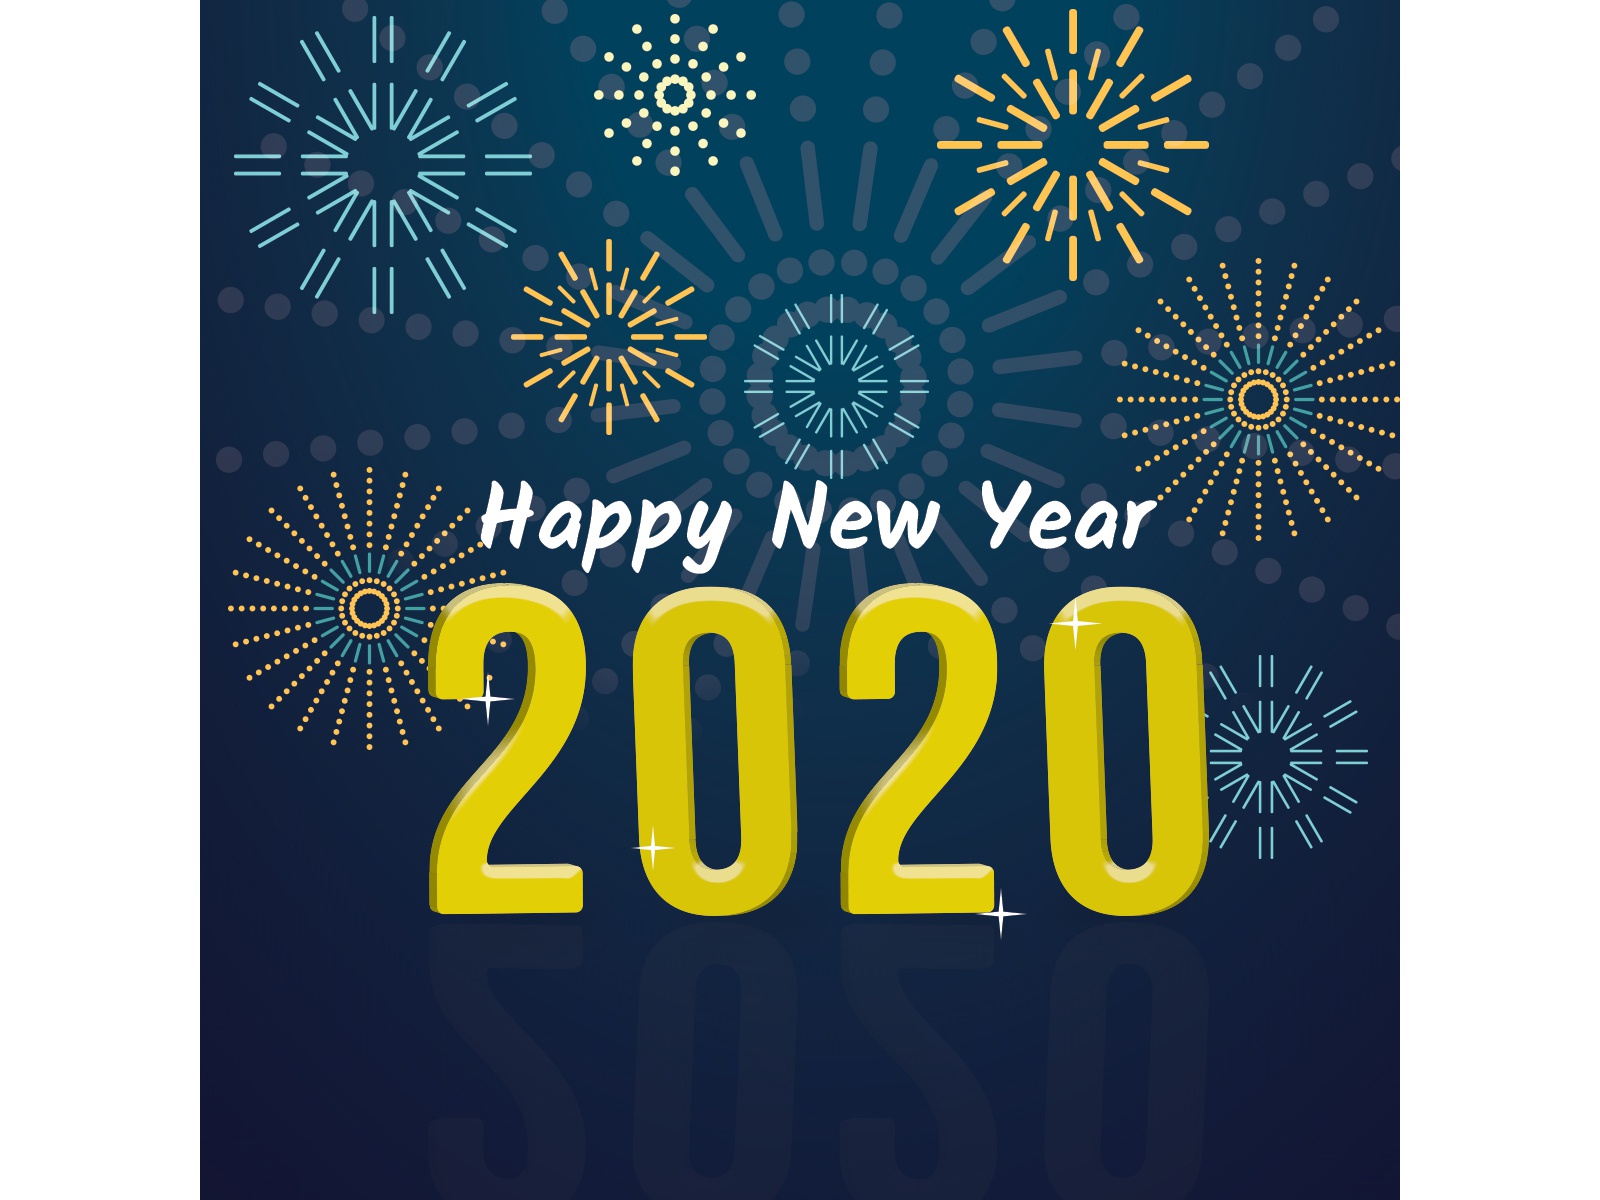 Happy New Year 2020 Images HD, Ultra-HD Wallpapers, 4K Photographs,  High-Quality Images, 3D Wallpapers, And Photos For WhatsApp, Facebook,  Instagram, Viber, Twitter, IMO, WeChat, Line, And Snapchat